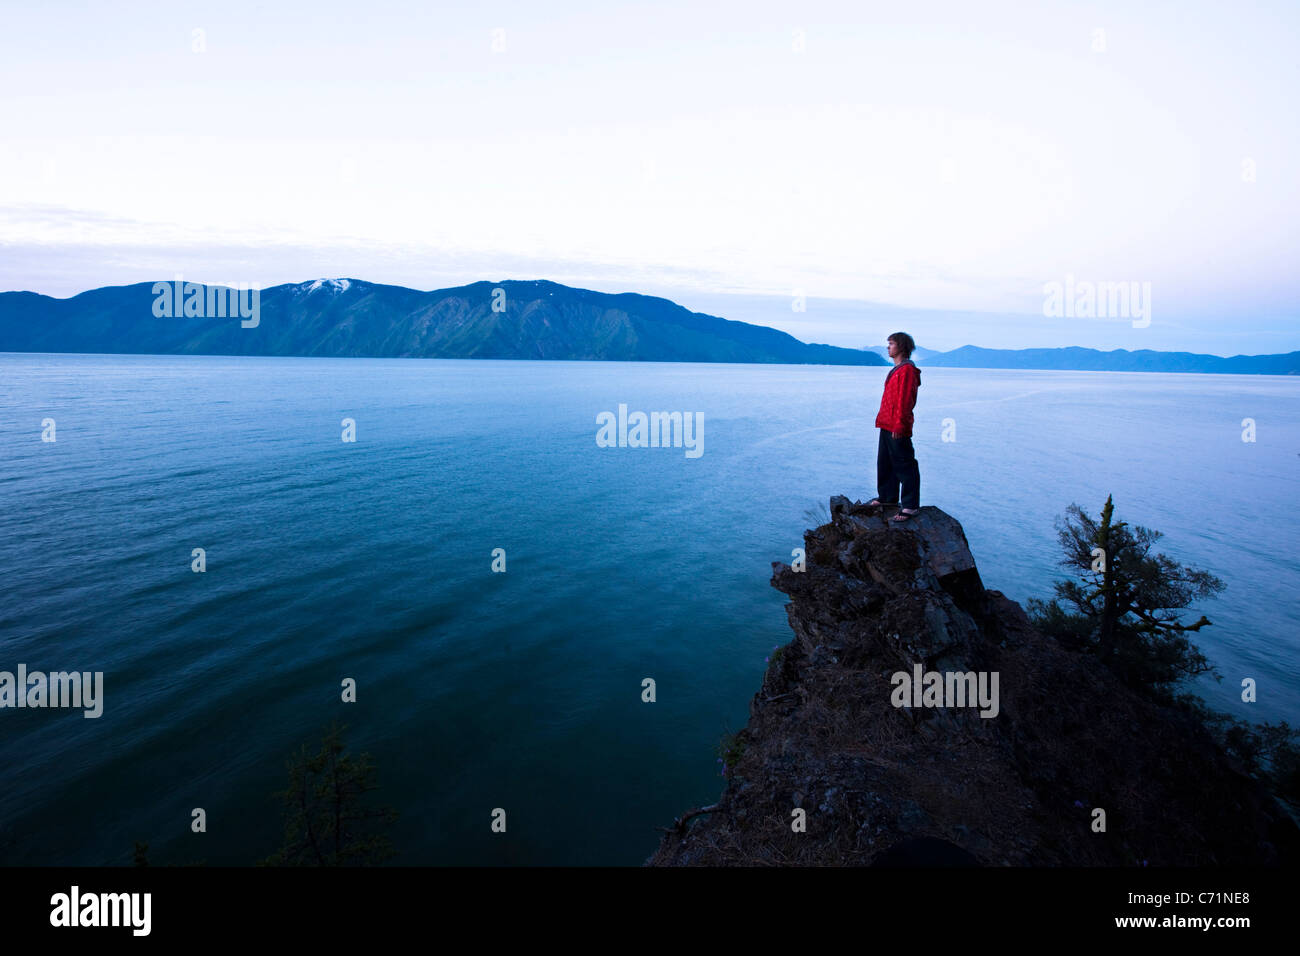 A handsome man peacefully stands on the edge of a cliff watching the sun rise over the lake in Idaho. Stock Photo